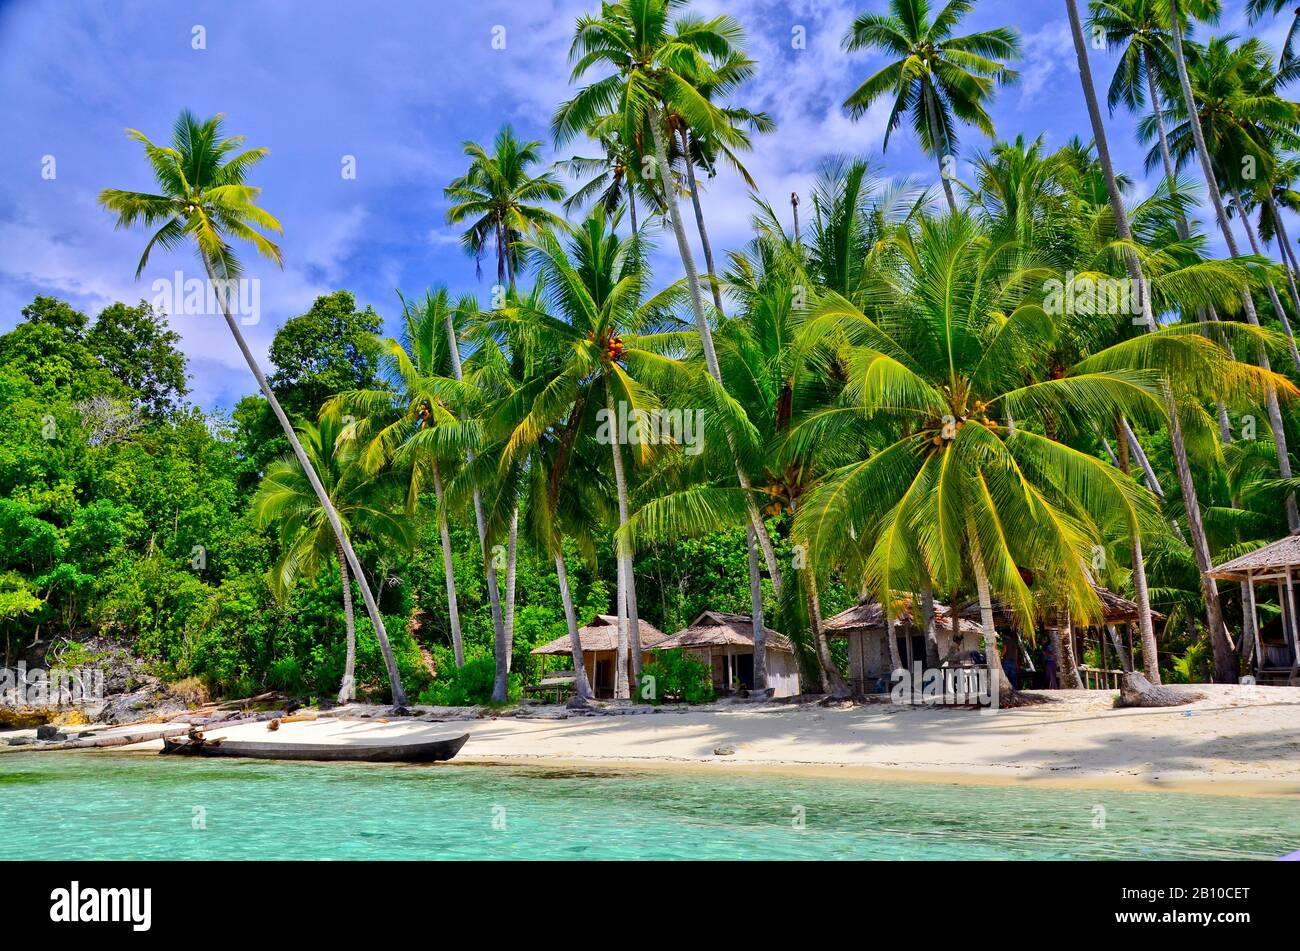 Beach with palm trees, Malenge Island, Tomini Bay, Togian Islands ...